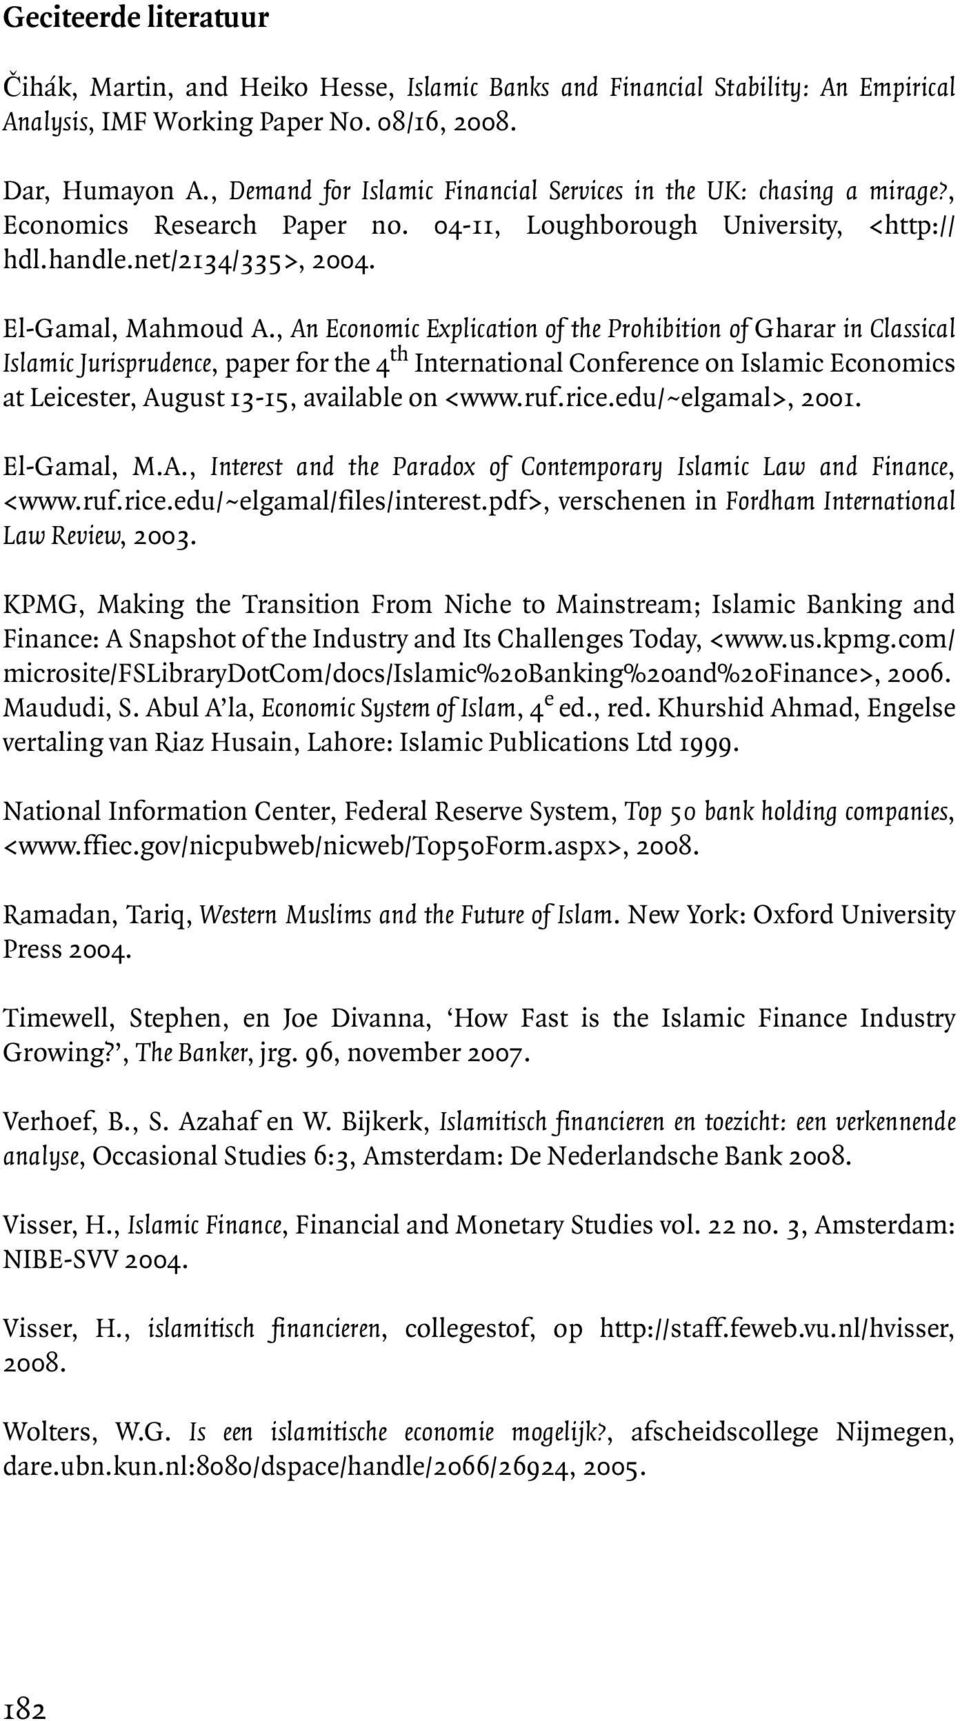 , An Economic Explication of the Prohibition of Gharar in Classical Islamic Jurisprudence, paper for the 4 th International Conference on Islamic Economics at Leicester, August 13-15, available on